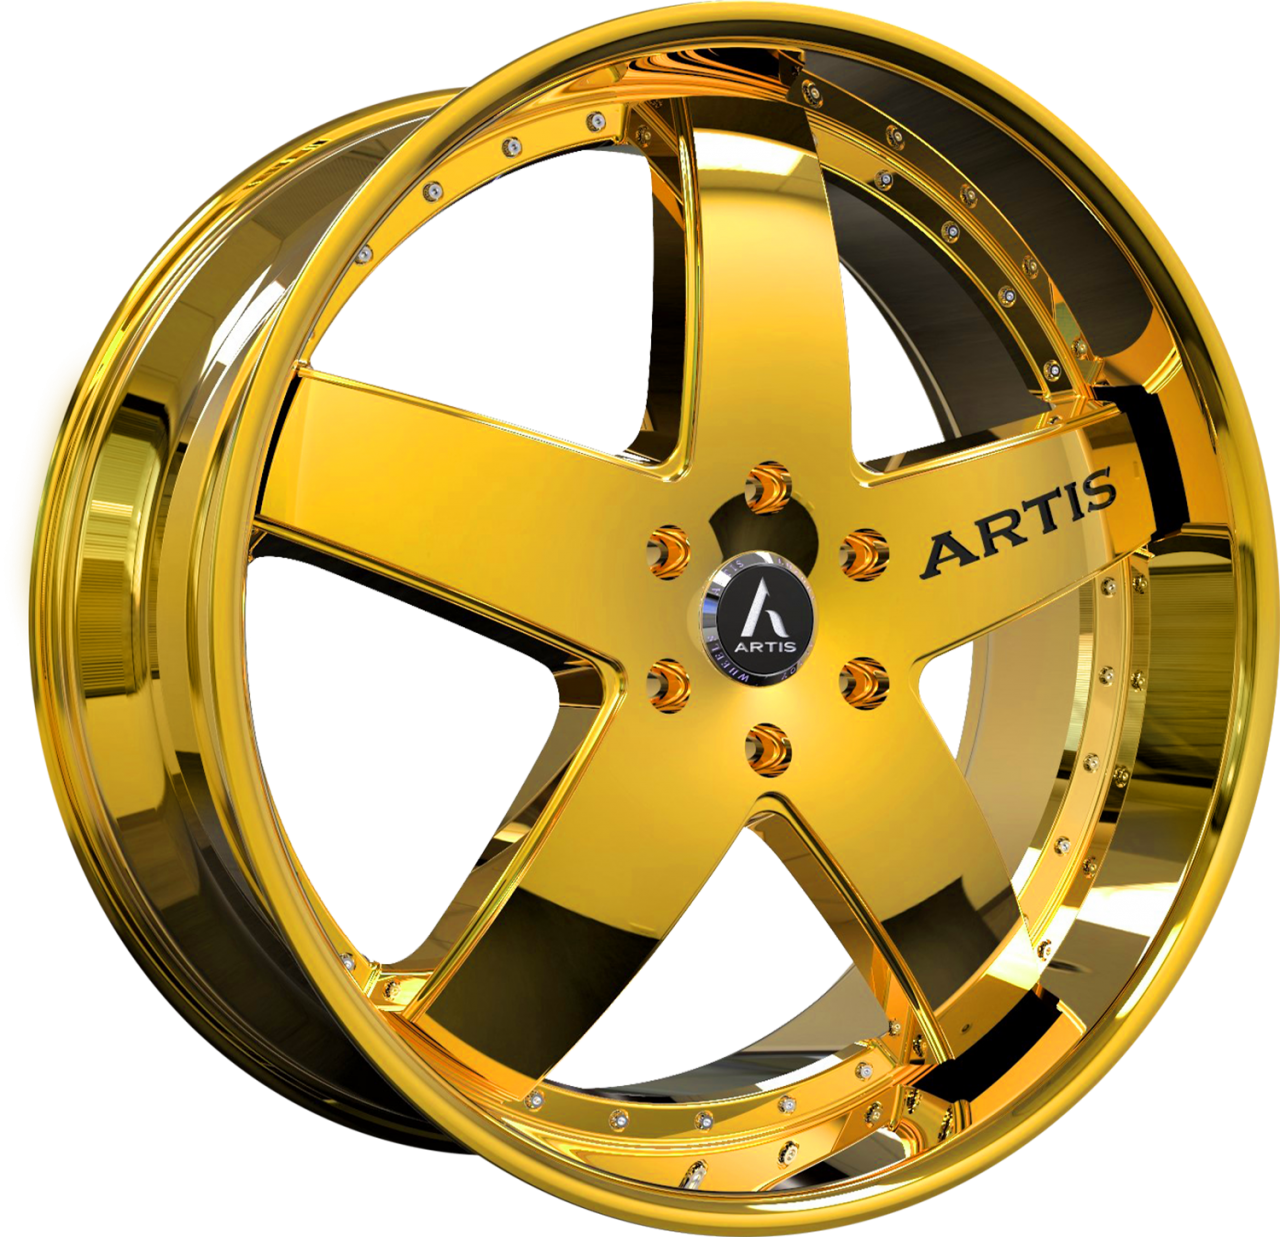 Artis Forged Booya wheel with G - Gold Tone finish